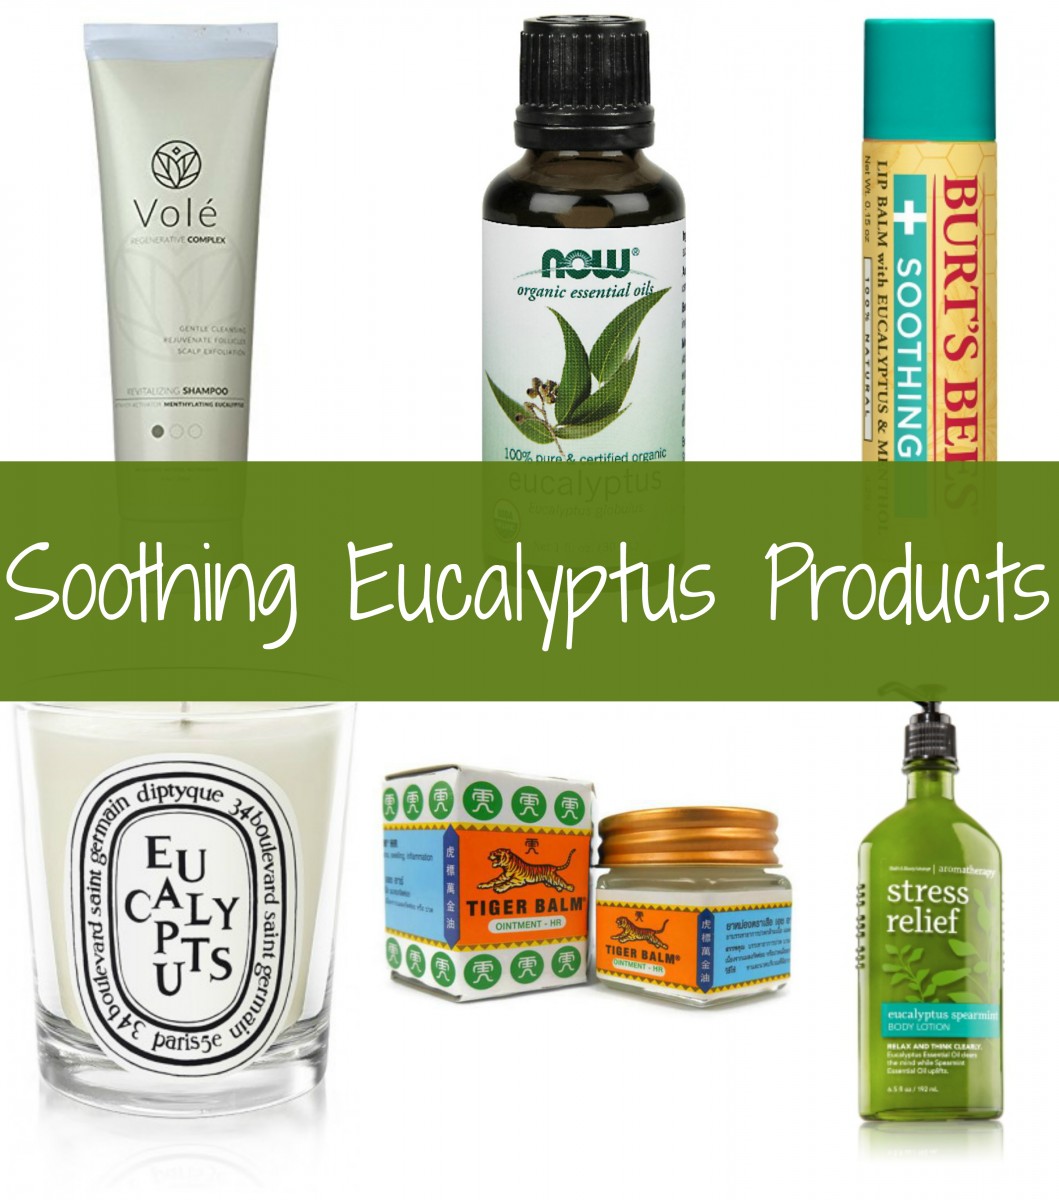 Soothing Eucalyptus Products Her Heartland Soul